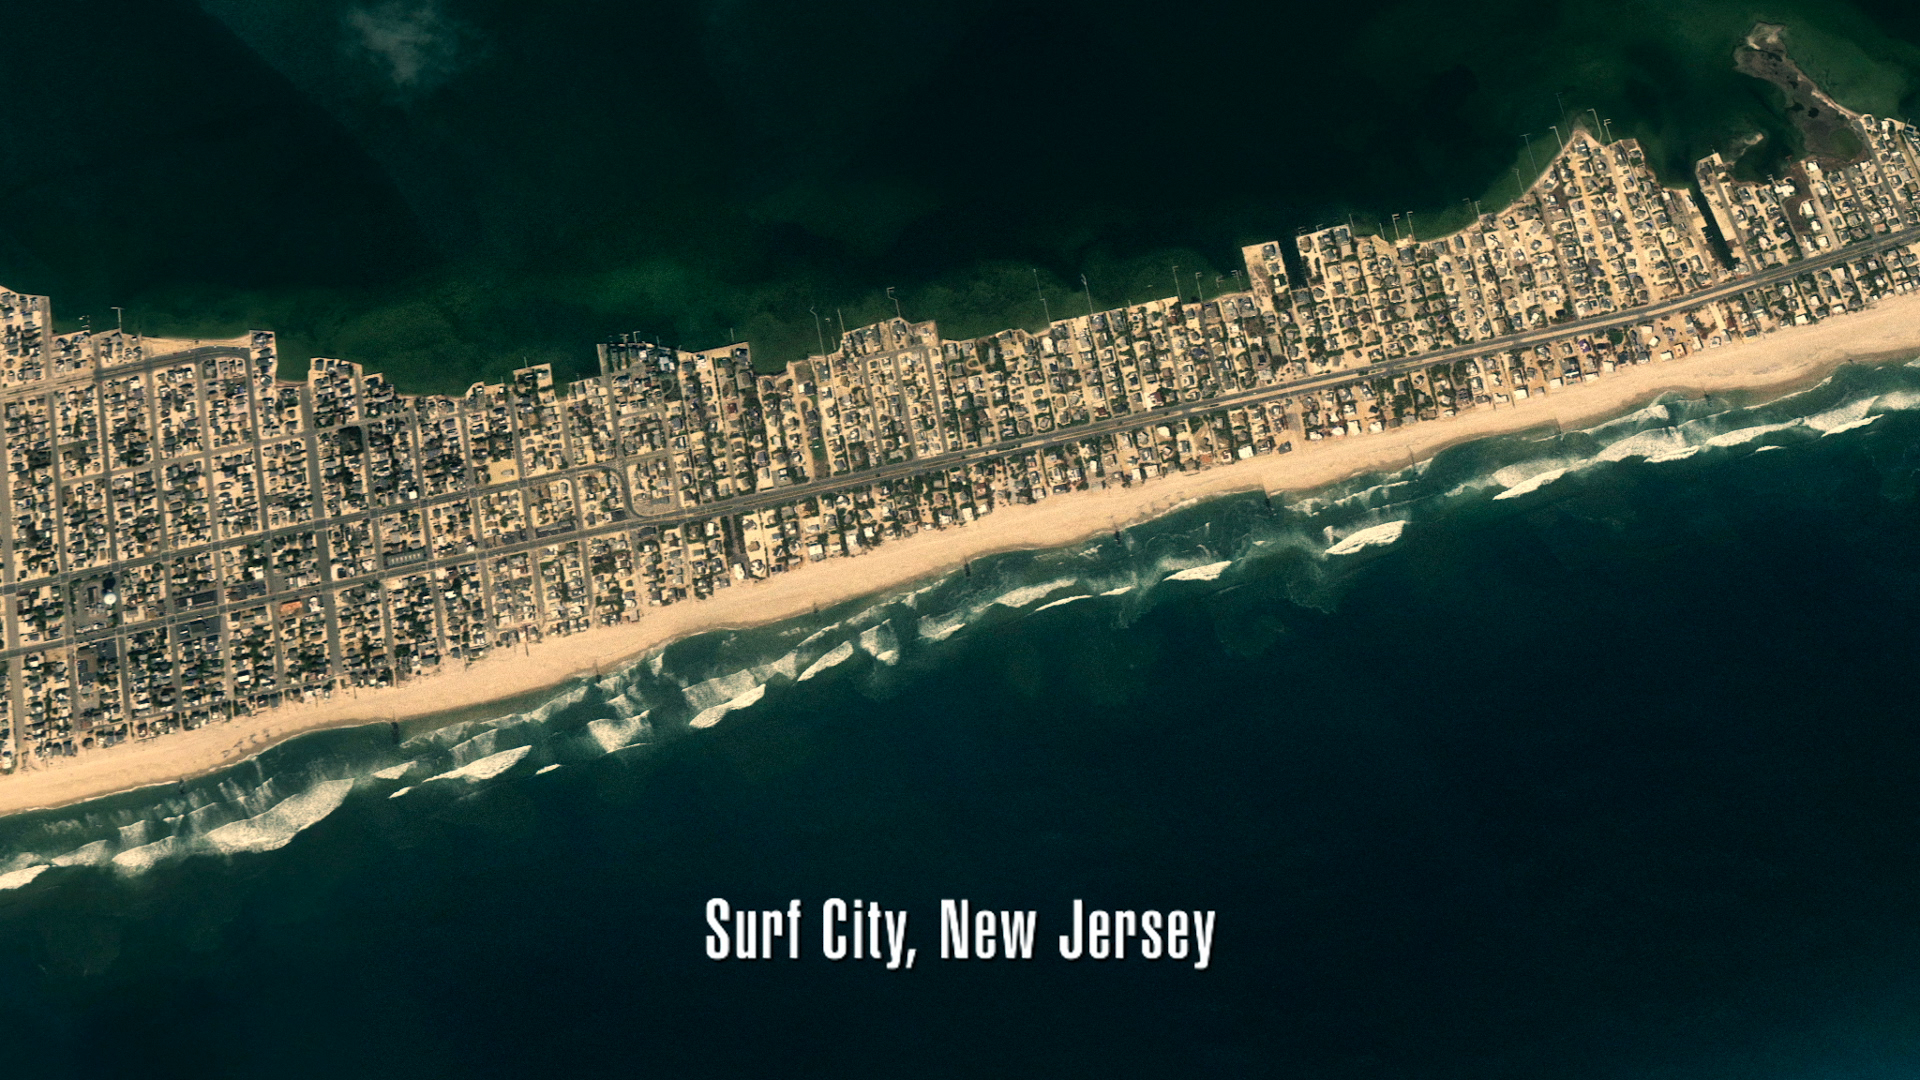 Google Earth imagery of Surf City, New Jersey